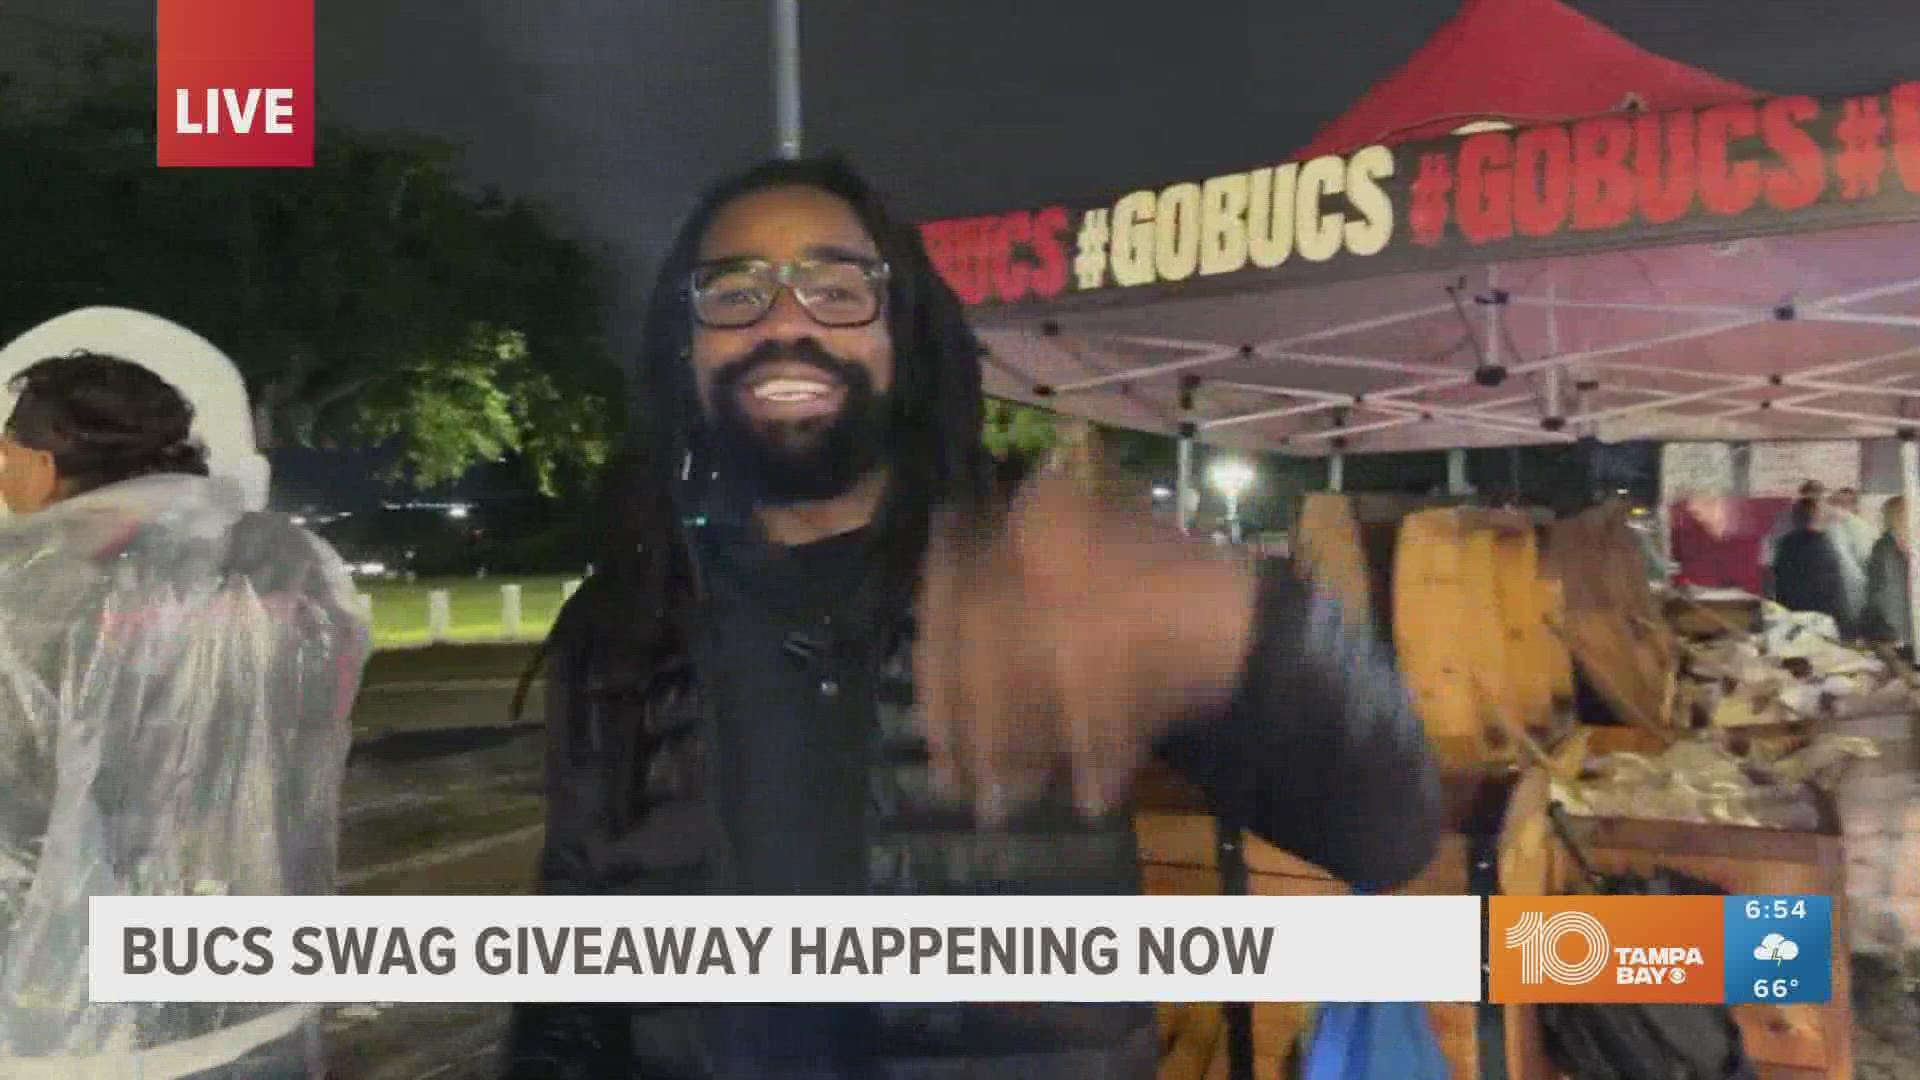 Early Friday morning, Tampa Bay fans can receive free Bucs swag at a drive-thru event at Raymond James Stadium's south parking lots.